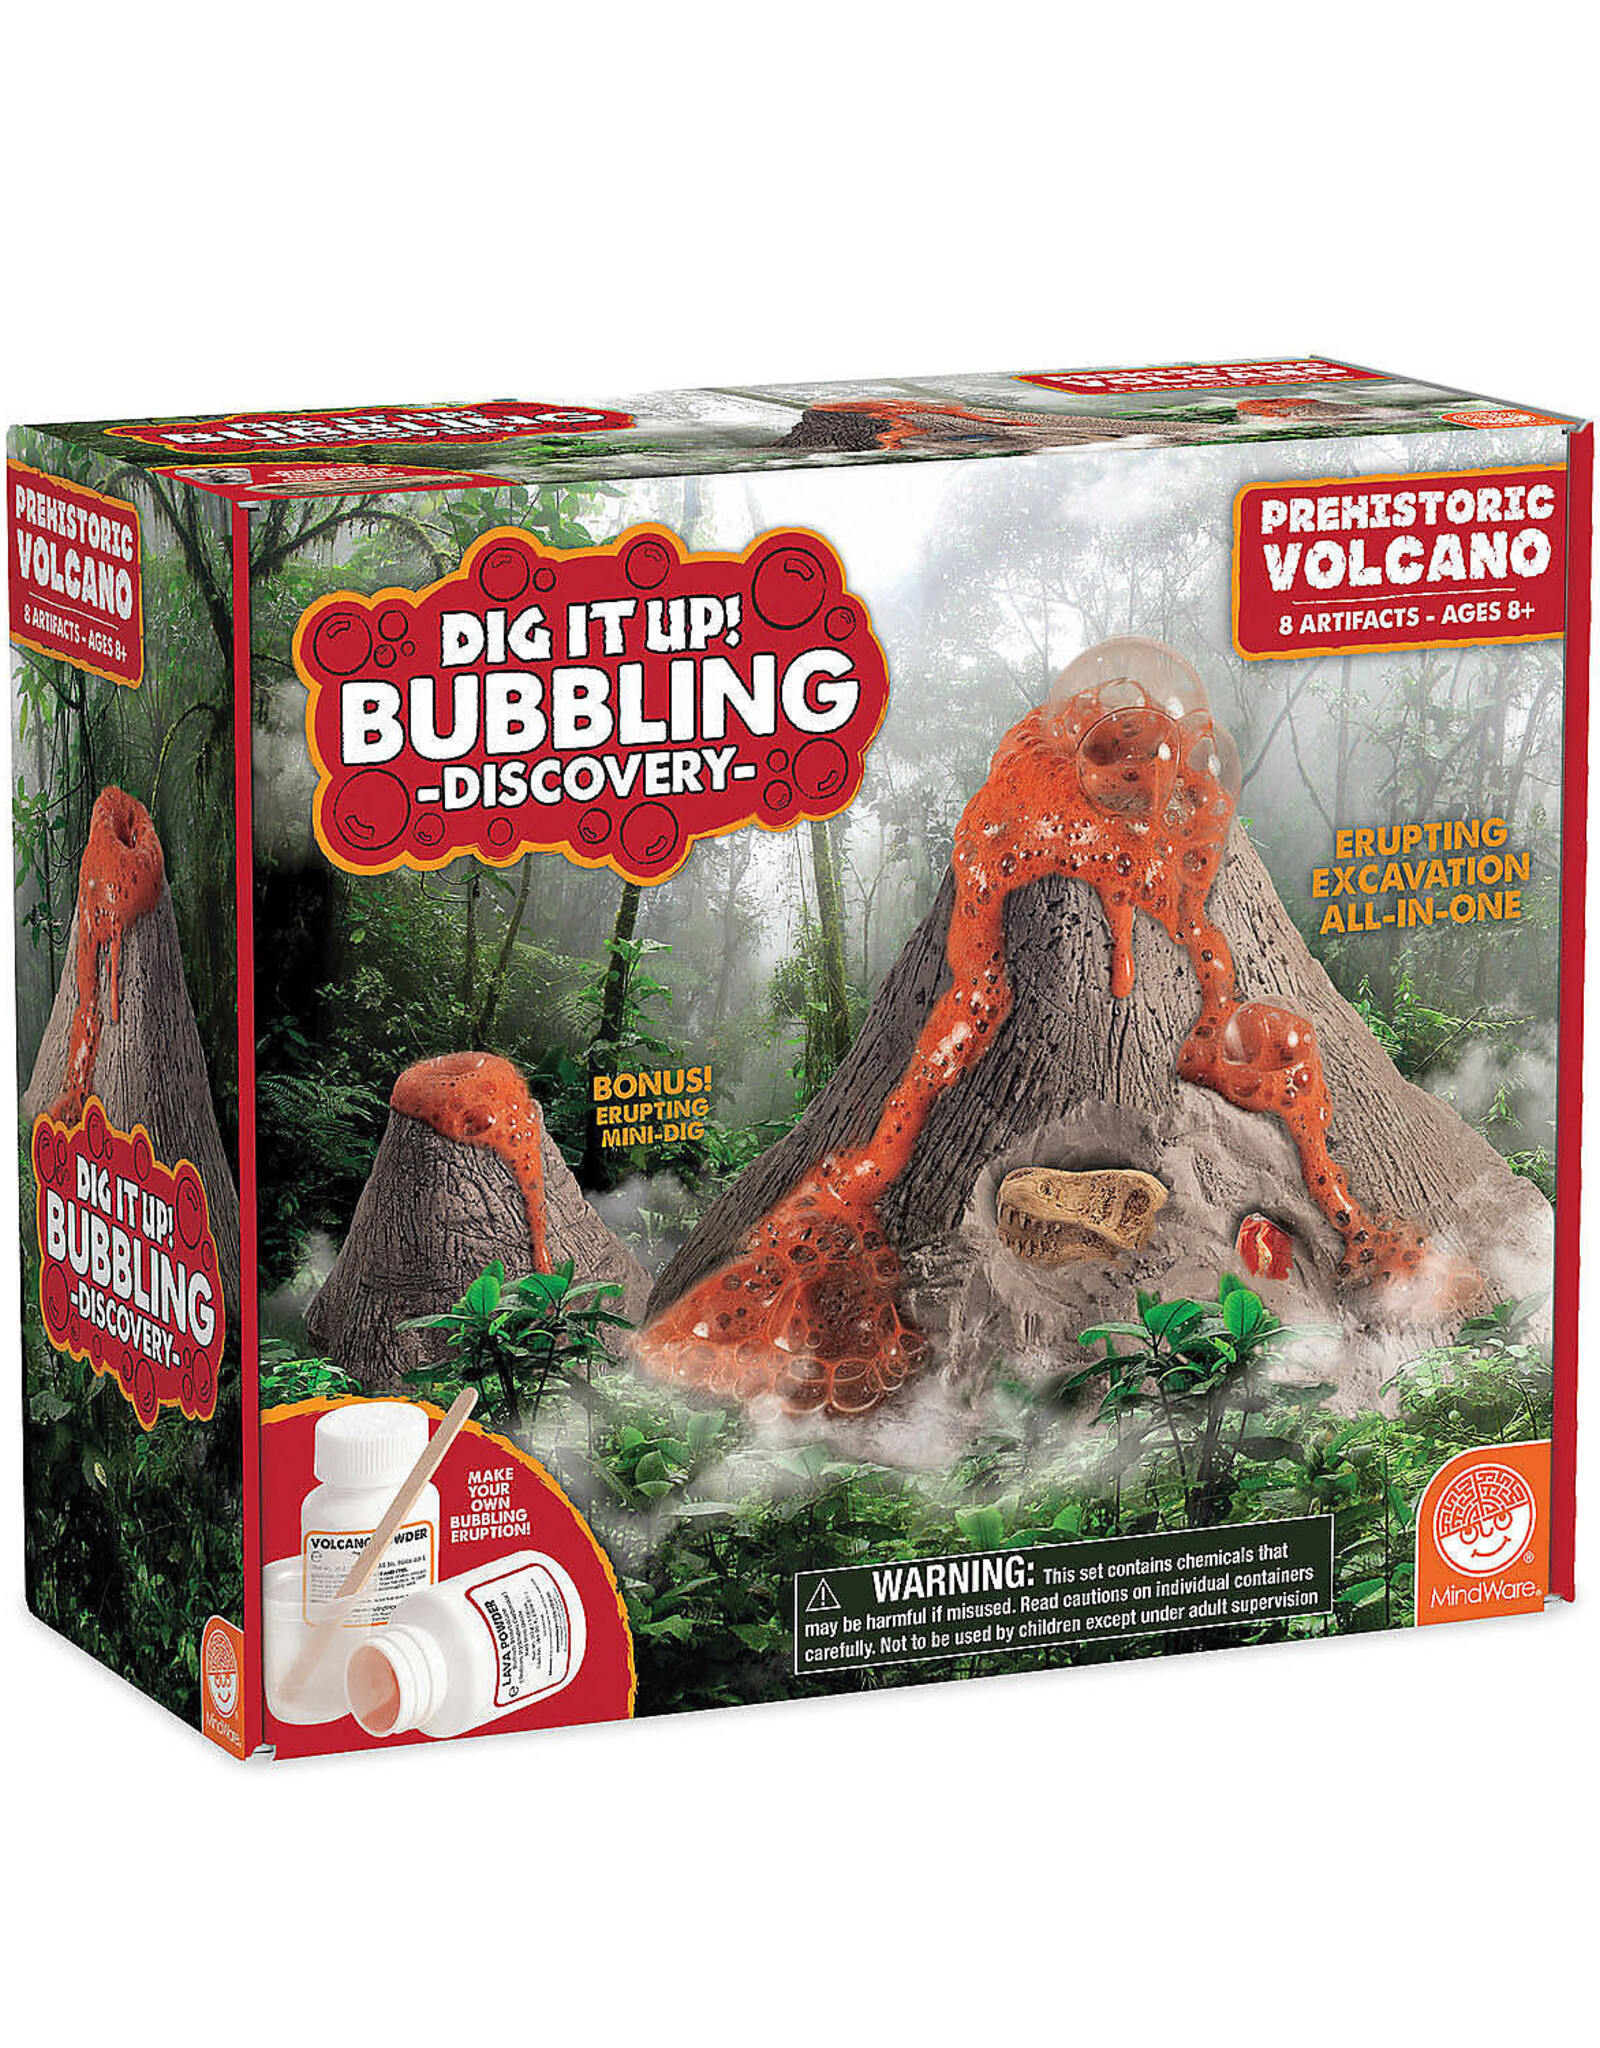 Peaceable Kingdom Dig it Up: Bubbling Discovery: Prehistoric Volcano